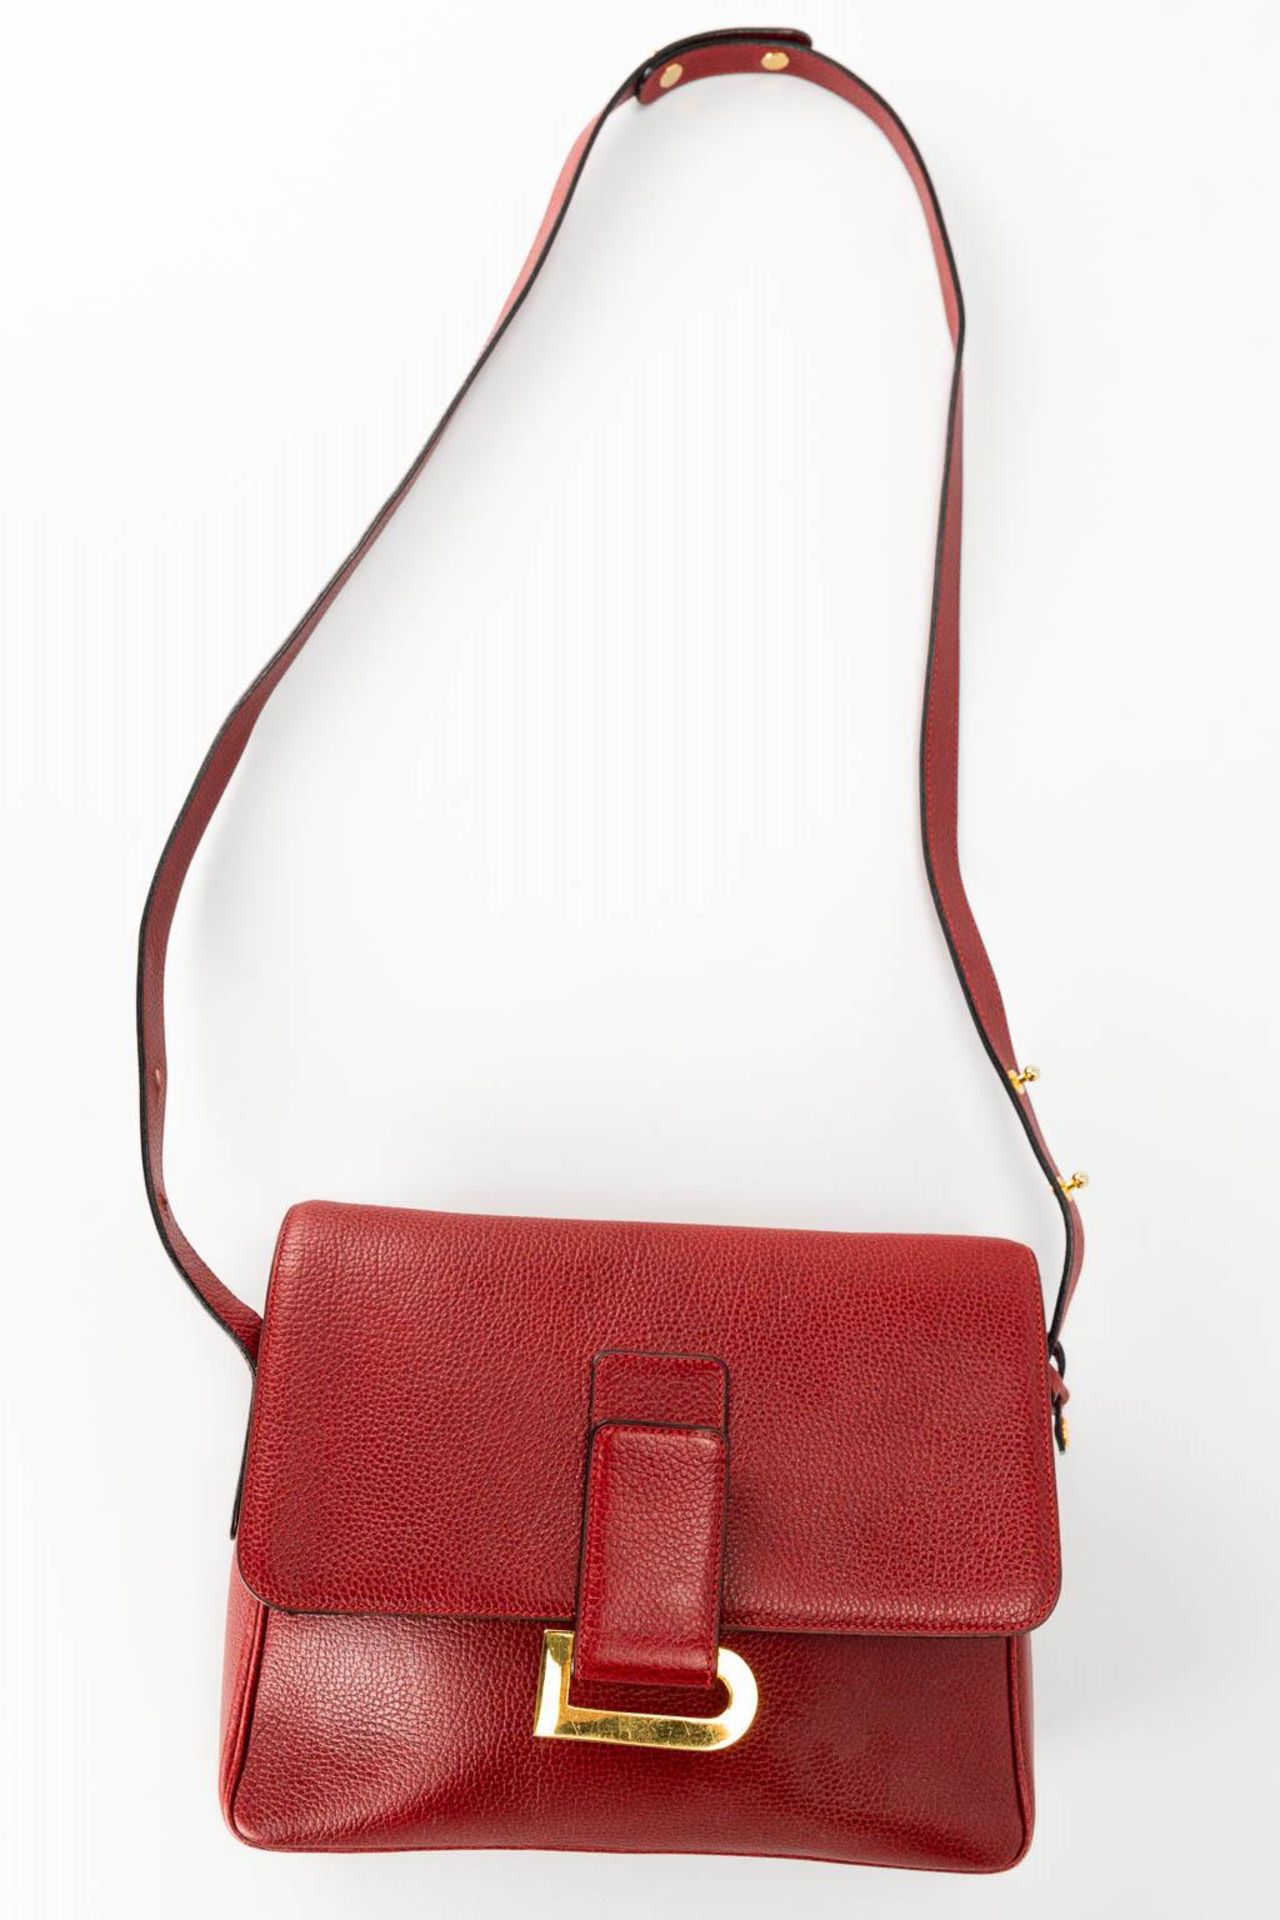 A purse made of red leather and marked Delvaux. - Image 15 of 16